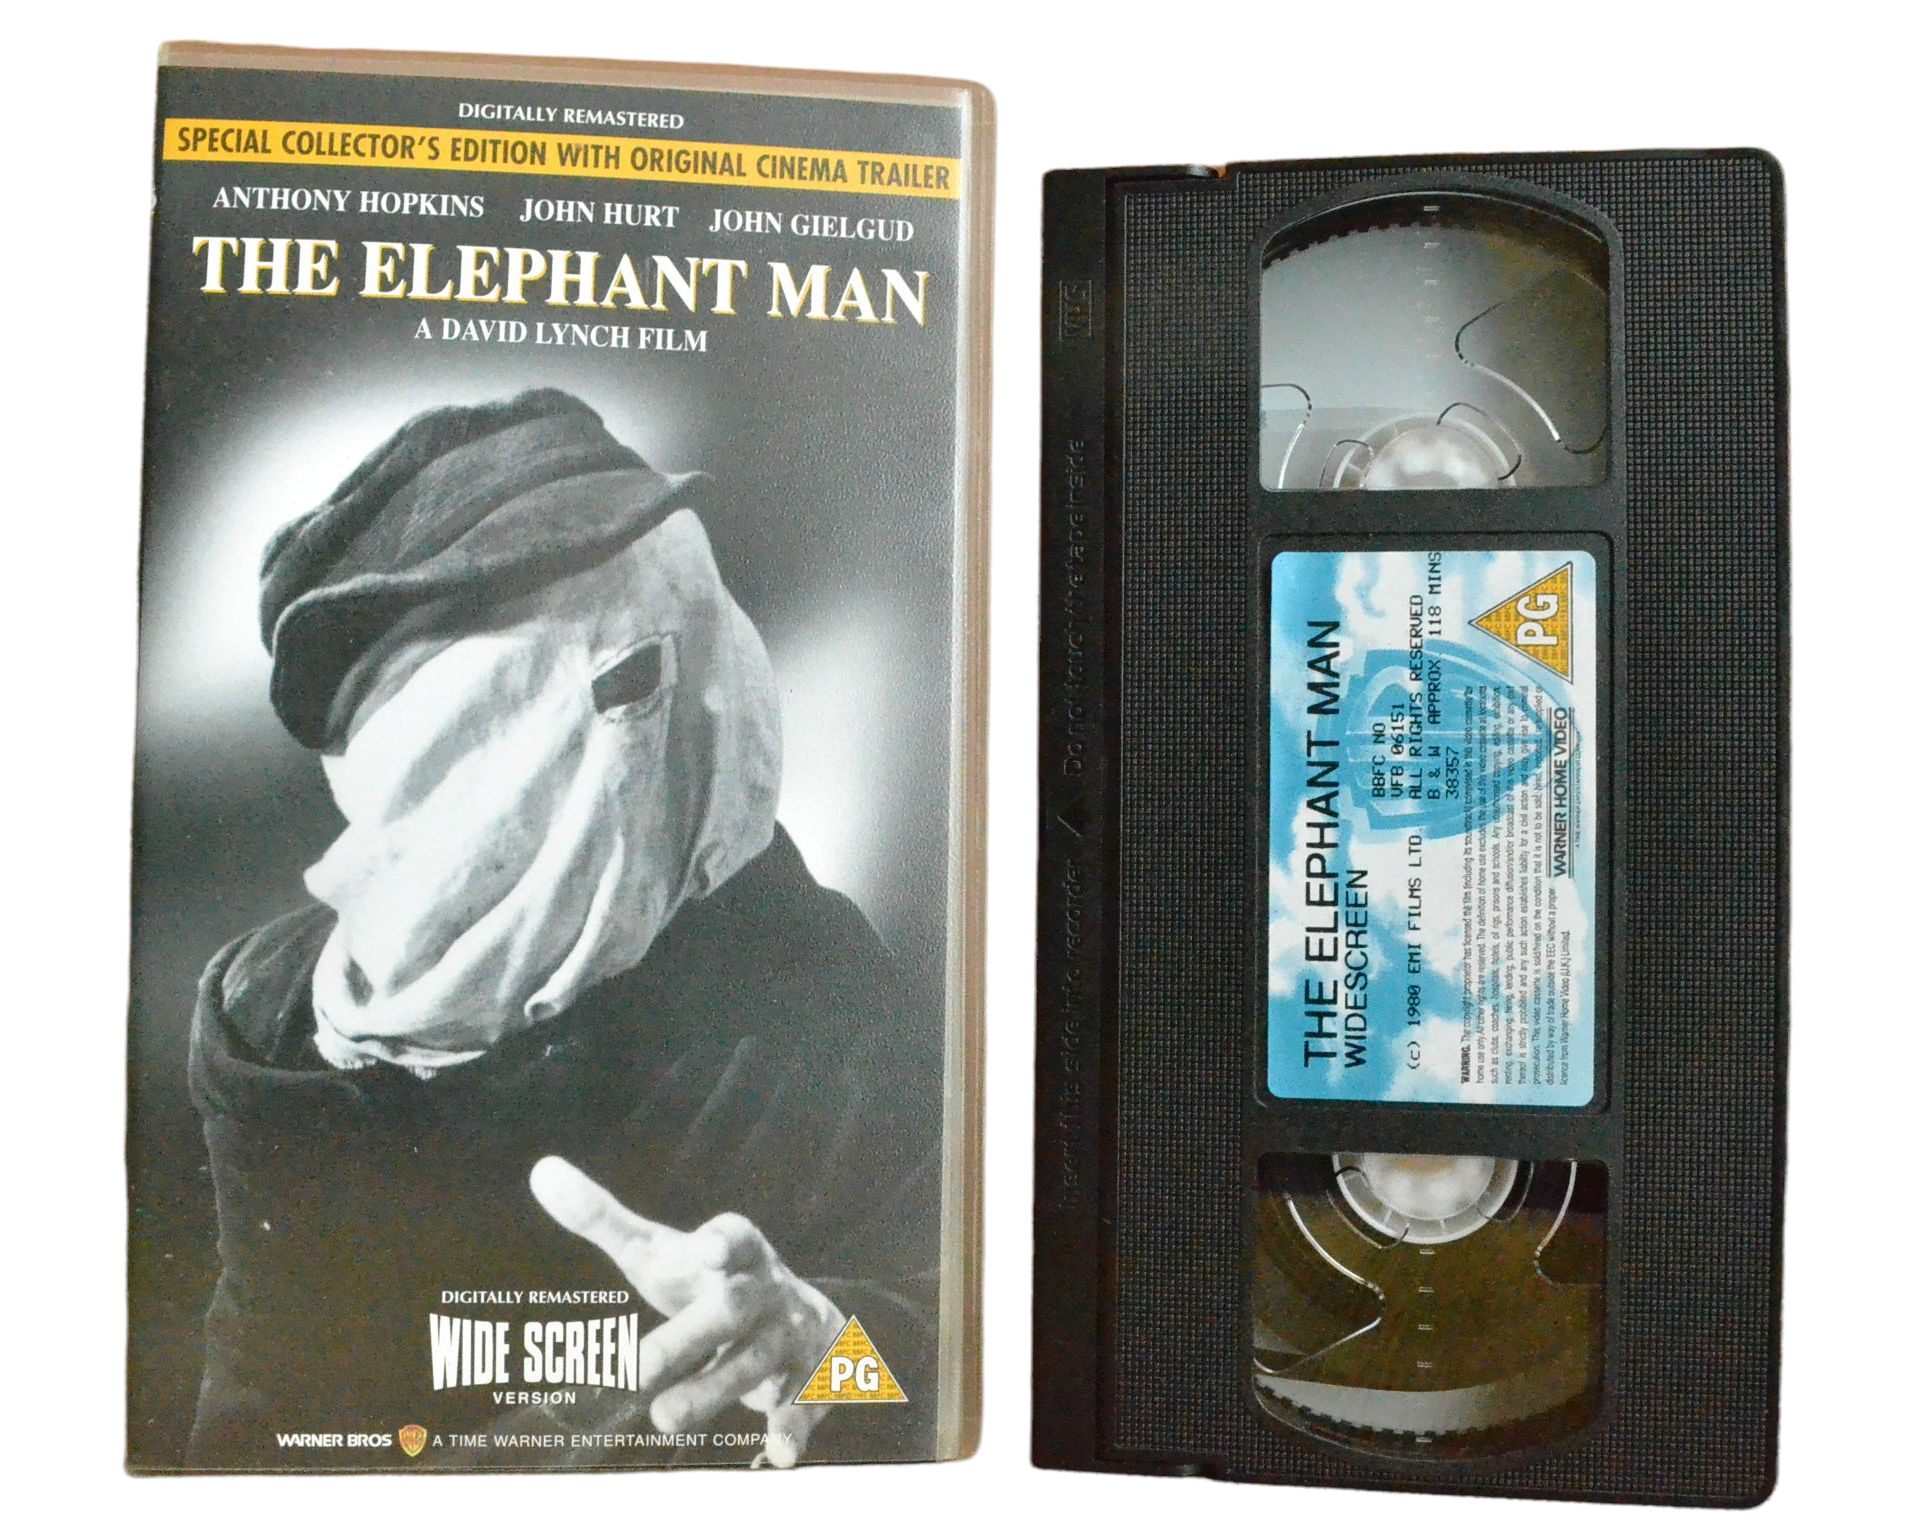 The Elephant Man (Special Collector's Edition) - Anthony Hopkins - Warner Home Video - Vintage - Pal VHS-